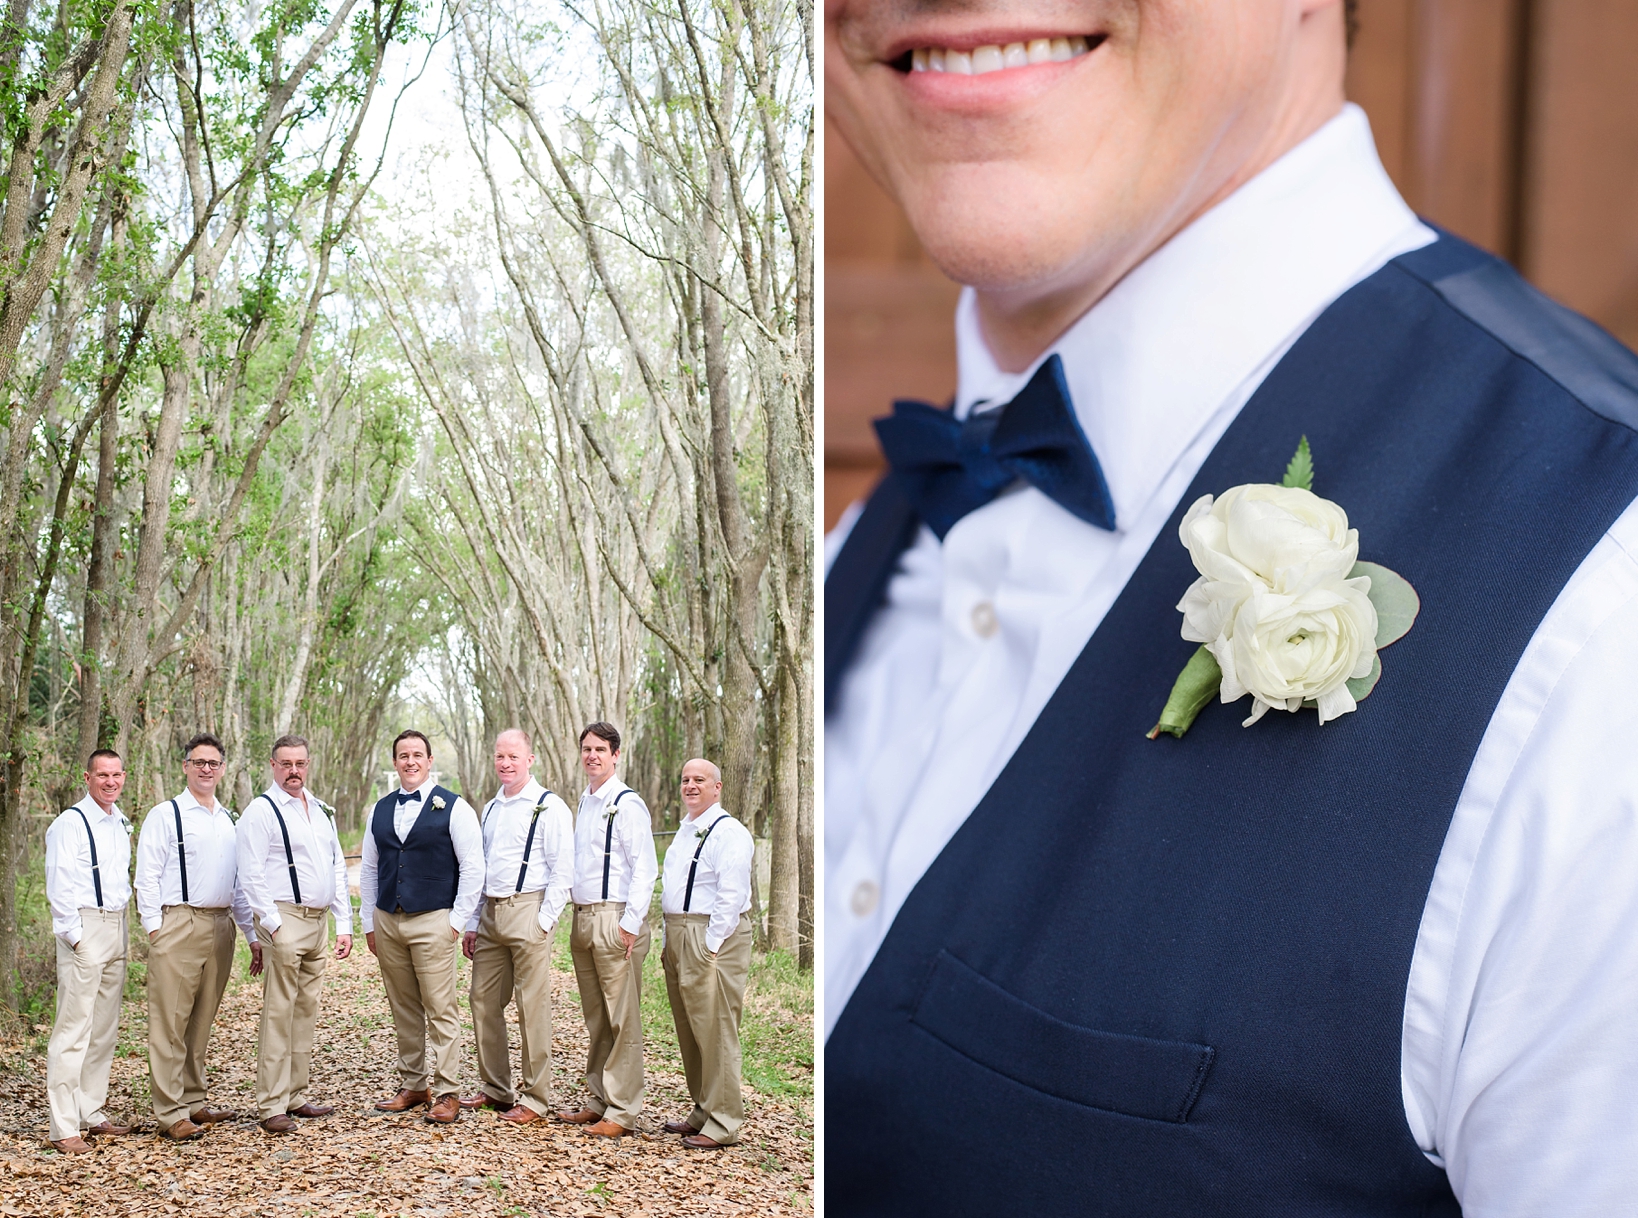 Groom's boutonniere of white roses and his groomsmen posed for a classic groomsmen photo 